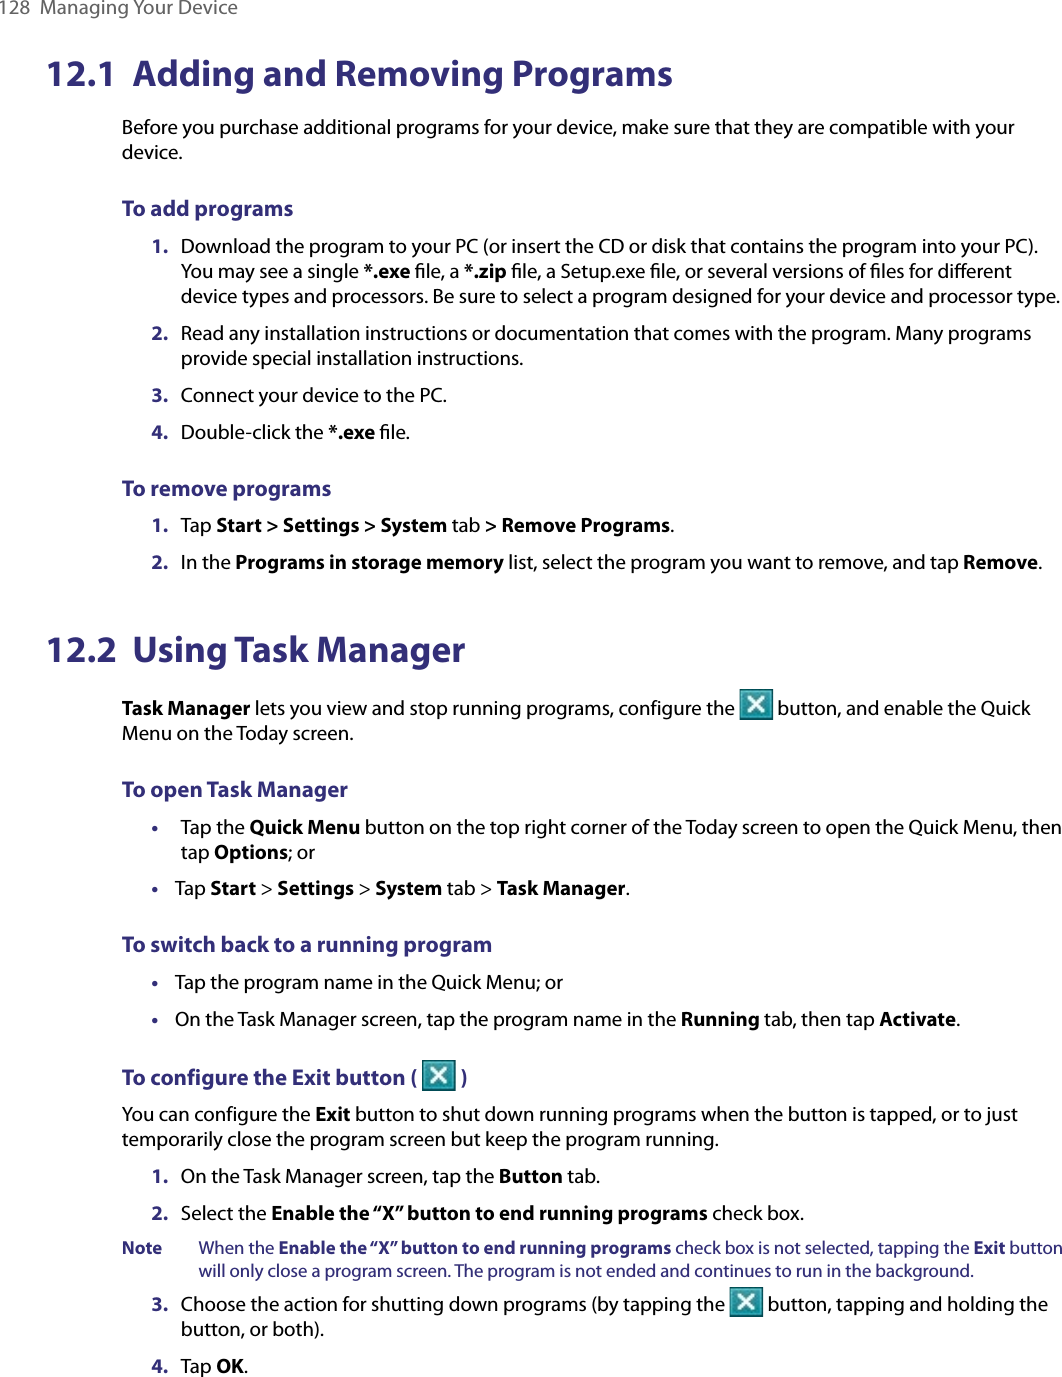 128  Managing Your Device12.1  Adding and Removing ProgramsBefore you purchase additional programs for your device, make sure that they are compatible with your device.To add programs 1.  Download the program to your PC (or insert the CD or disk that contains the program into your PC). You may see a single *.exe ﬁle, a *.zip ﬁle, a Setup.exe ﬁle, or several versions of ﬁles for diﬀerent device types and processors. Be sure to select a program designed for your device and processor type. 2.  Read any installation instructions or documentation that comes with the program. Many programs provide special installation instructions. 3.  Connect your device to the PC.4.  Double-click the *.exe ﬁle.To remove programs1.  Tap Start &gt; Settings &gt; System tab &gt; Remove Programs.2.  In the Programs in storage memory list, select the program you want to remove, and tap Remove.12.2  Using Task ManagerTask Manager lets you view and stop running programs, configure the   button, and enable the Quick Menu on the Today screen.To open Task Manager•  Tap the Quick Menu button on the top right corner of the Today screen to open the Quick Menu, then tap Options; or•  Tap Start &gt; Settings &gt; System tab &gt; Task Manager.To switch back to a running program•  Tap the program name in the Quick Menu; or•  On the Task Manager screen, tap the program name in the Running tab, then tap Activate.To configure the Exit button (   )You can configure the Exit button to shut down running programs when the button is tapped, or to just temporarily close the program screen but keep the program running.1.  On the Task Manager screen, tap the Button tab.2.  Select the Enable the “X” button to end running programs check box.Note When the Enable the “X” button to end running programs check box is not selected, tapping the Exit button will only close a program screen. The program is not ended and continues to run in the background.3.  Choose the action for shutting down programs (by tapping the   button, tapping and holding the button, or both).4.  Tap OK.